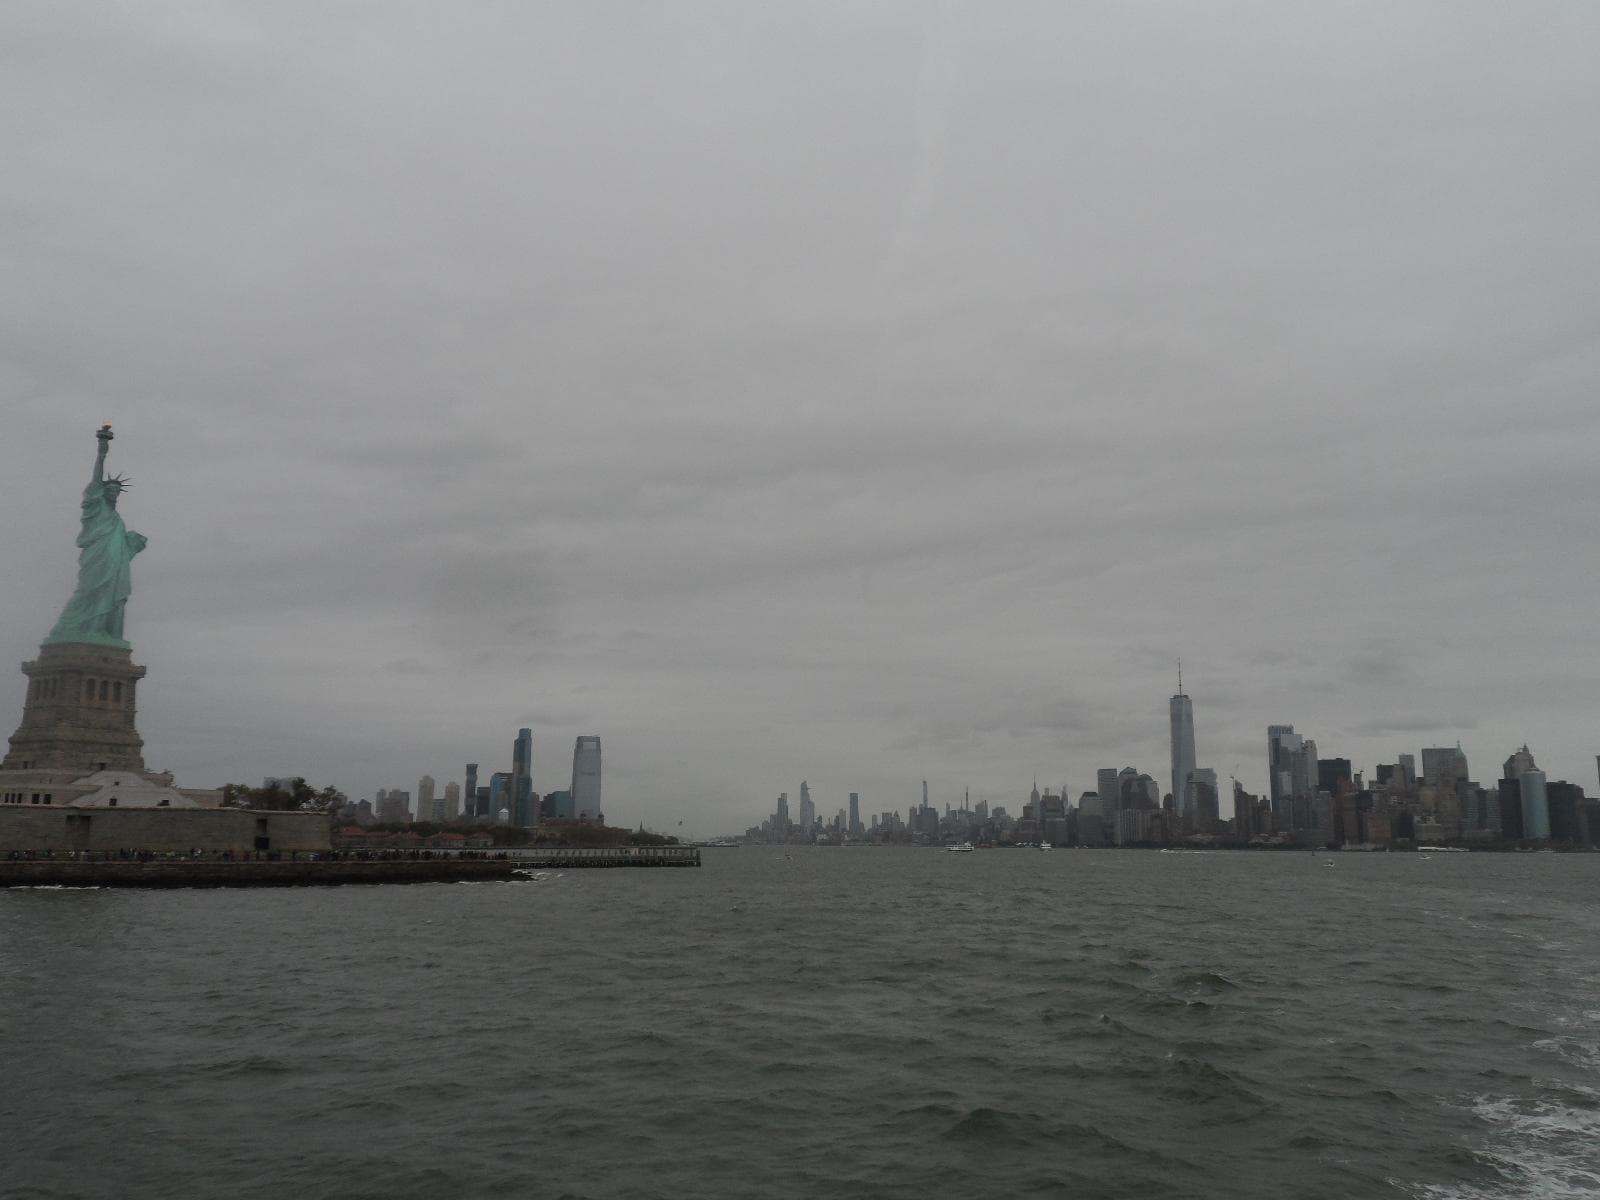 While riding the ferry to Liberty Island, looking back at the Statue of Liberty and South Manhattan; photo credit: Katherine Michel